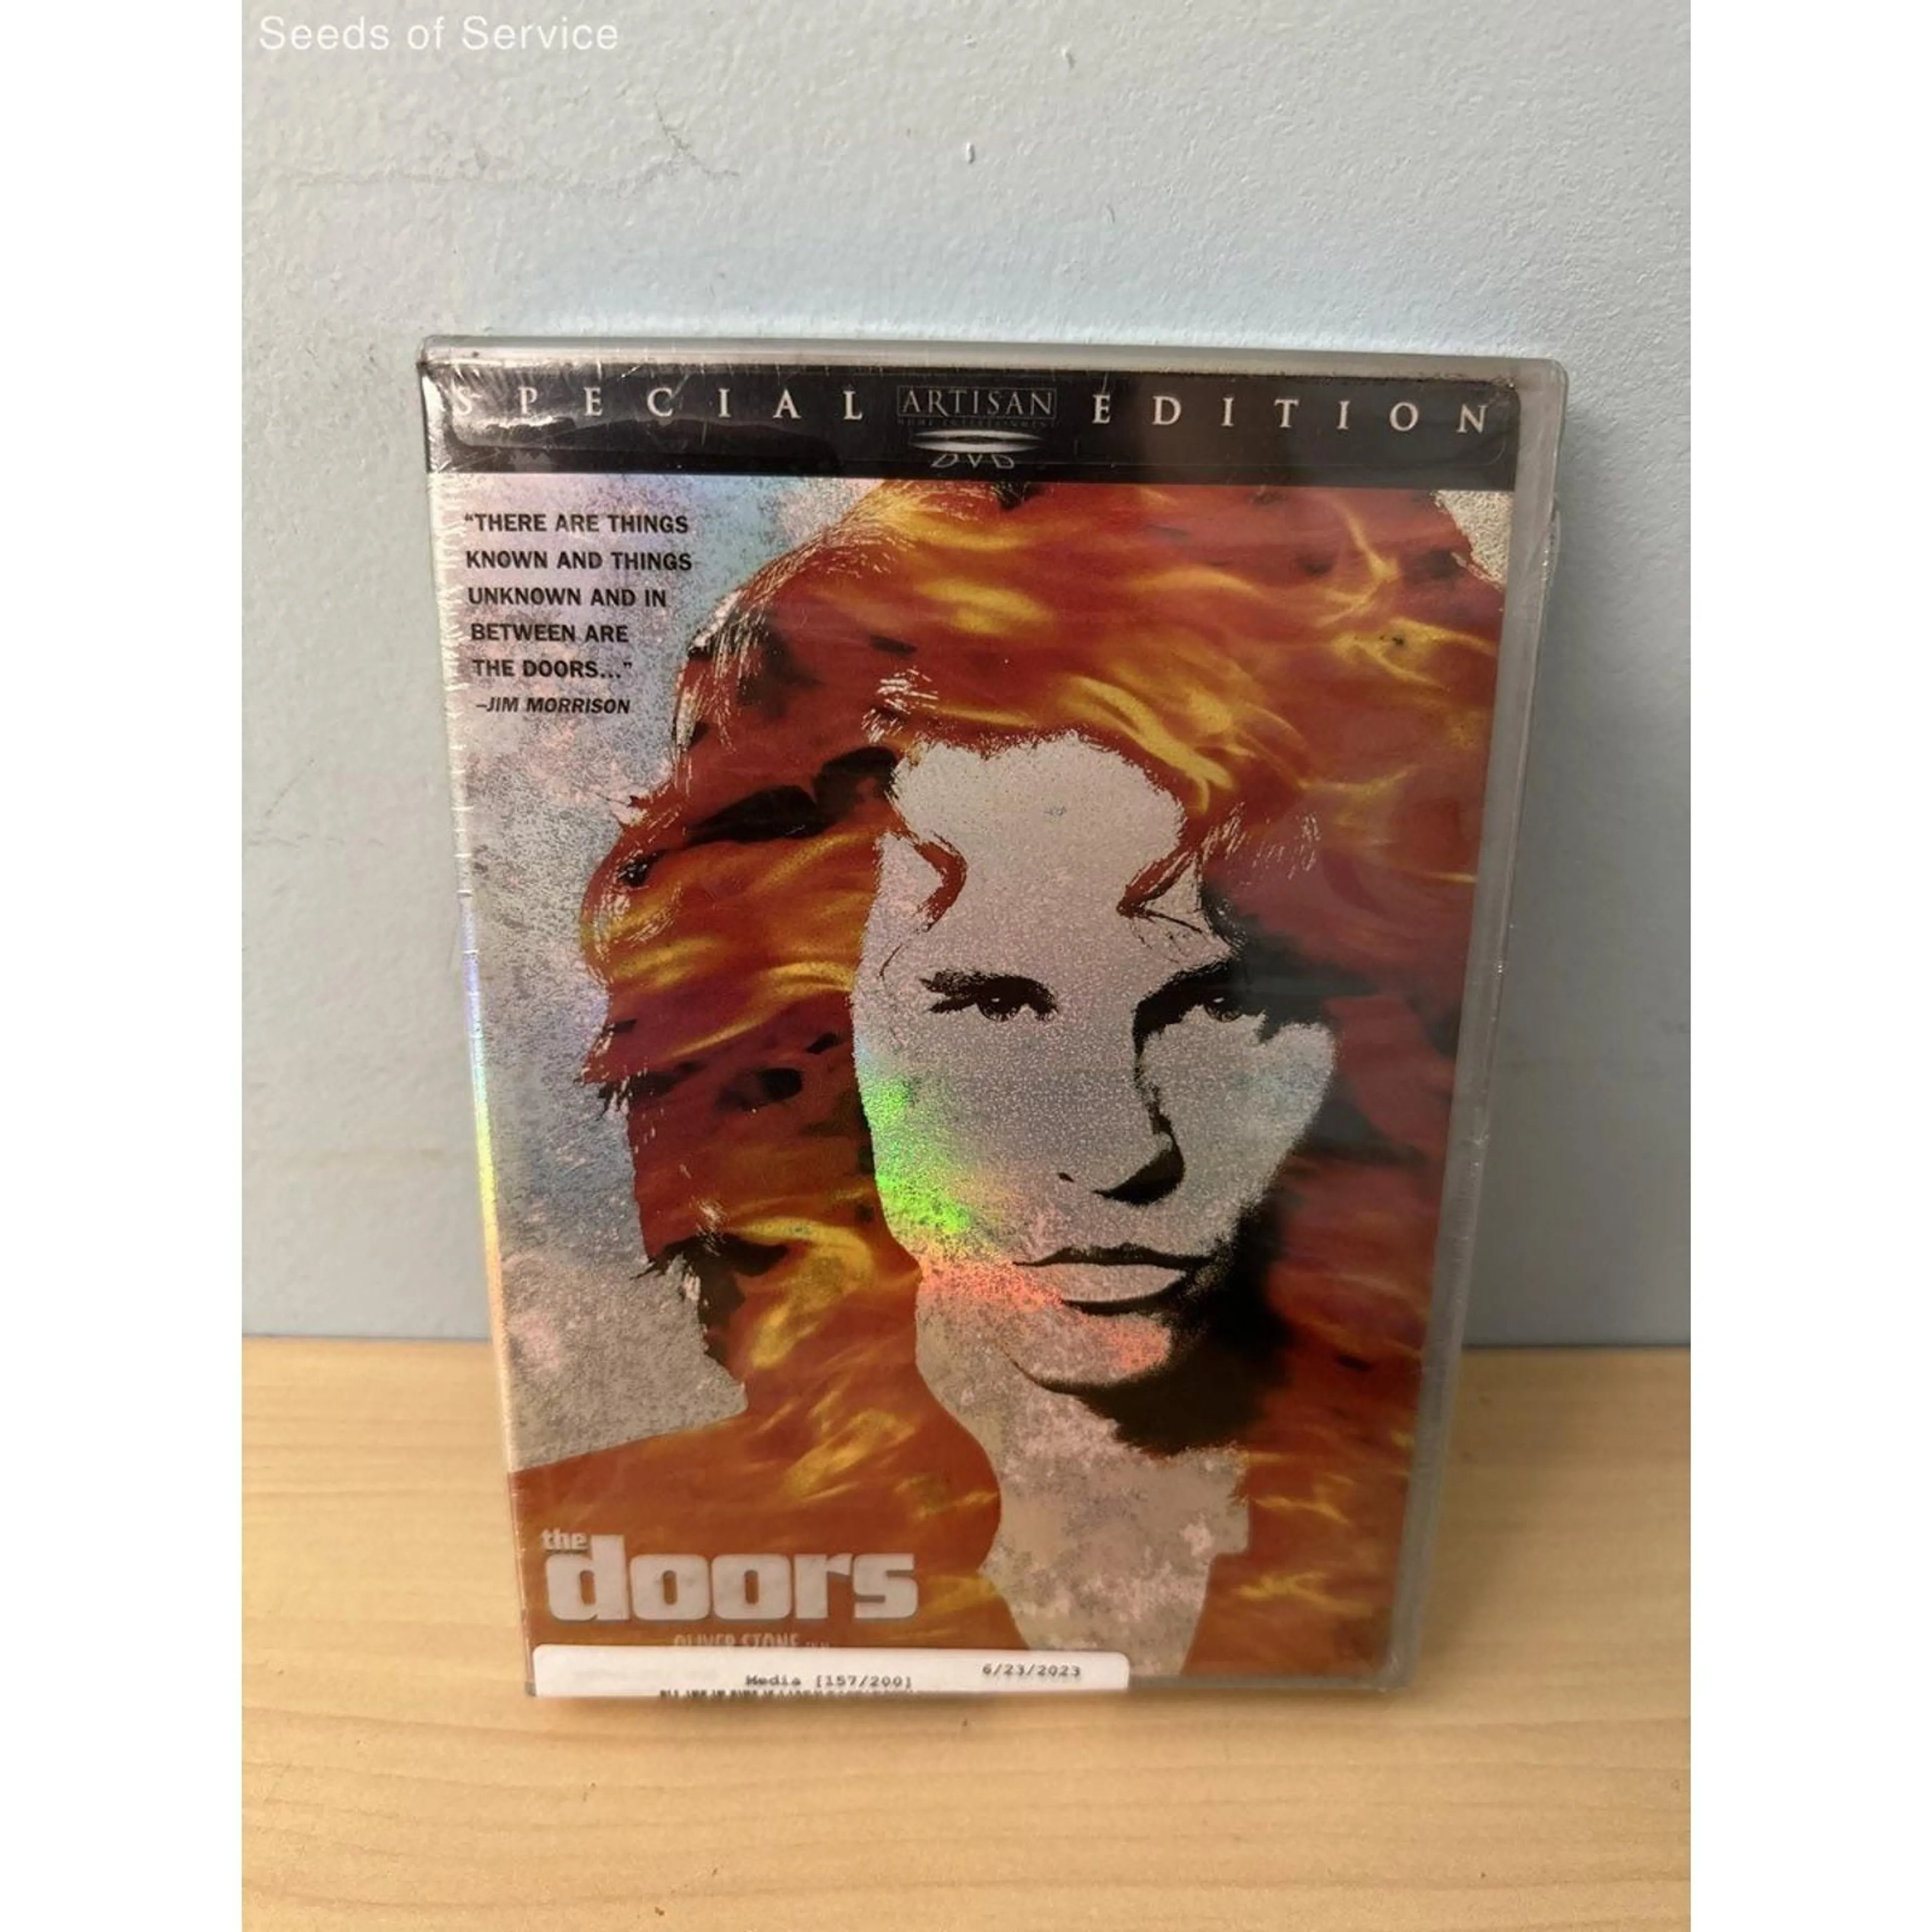 The Doors Special Edition DVD 2001 · Whatnot: Buy